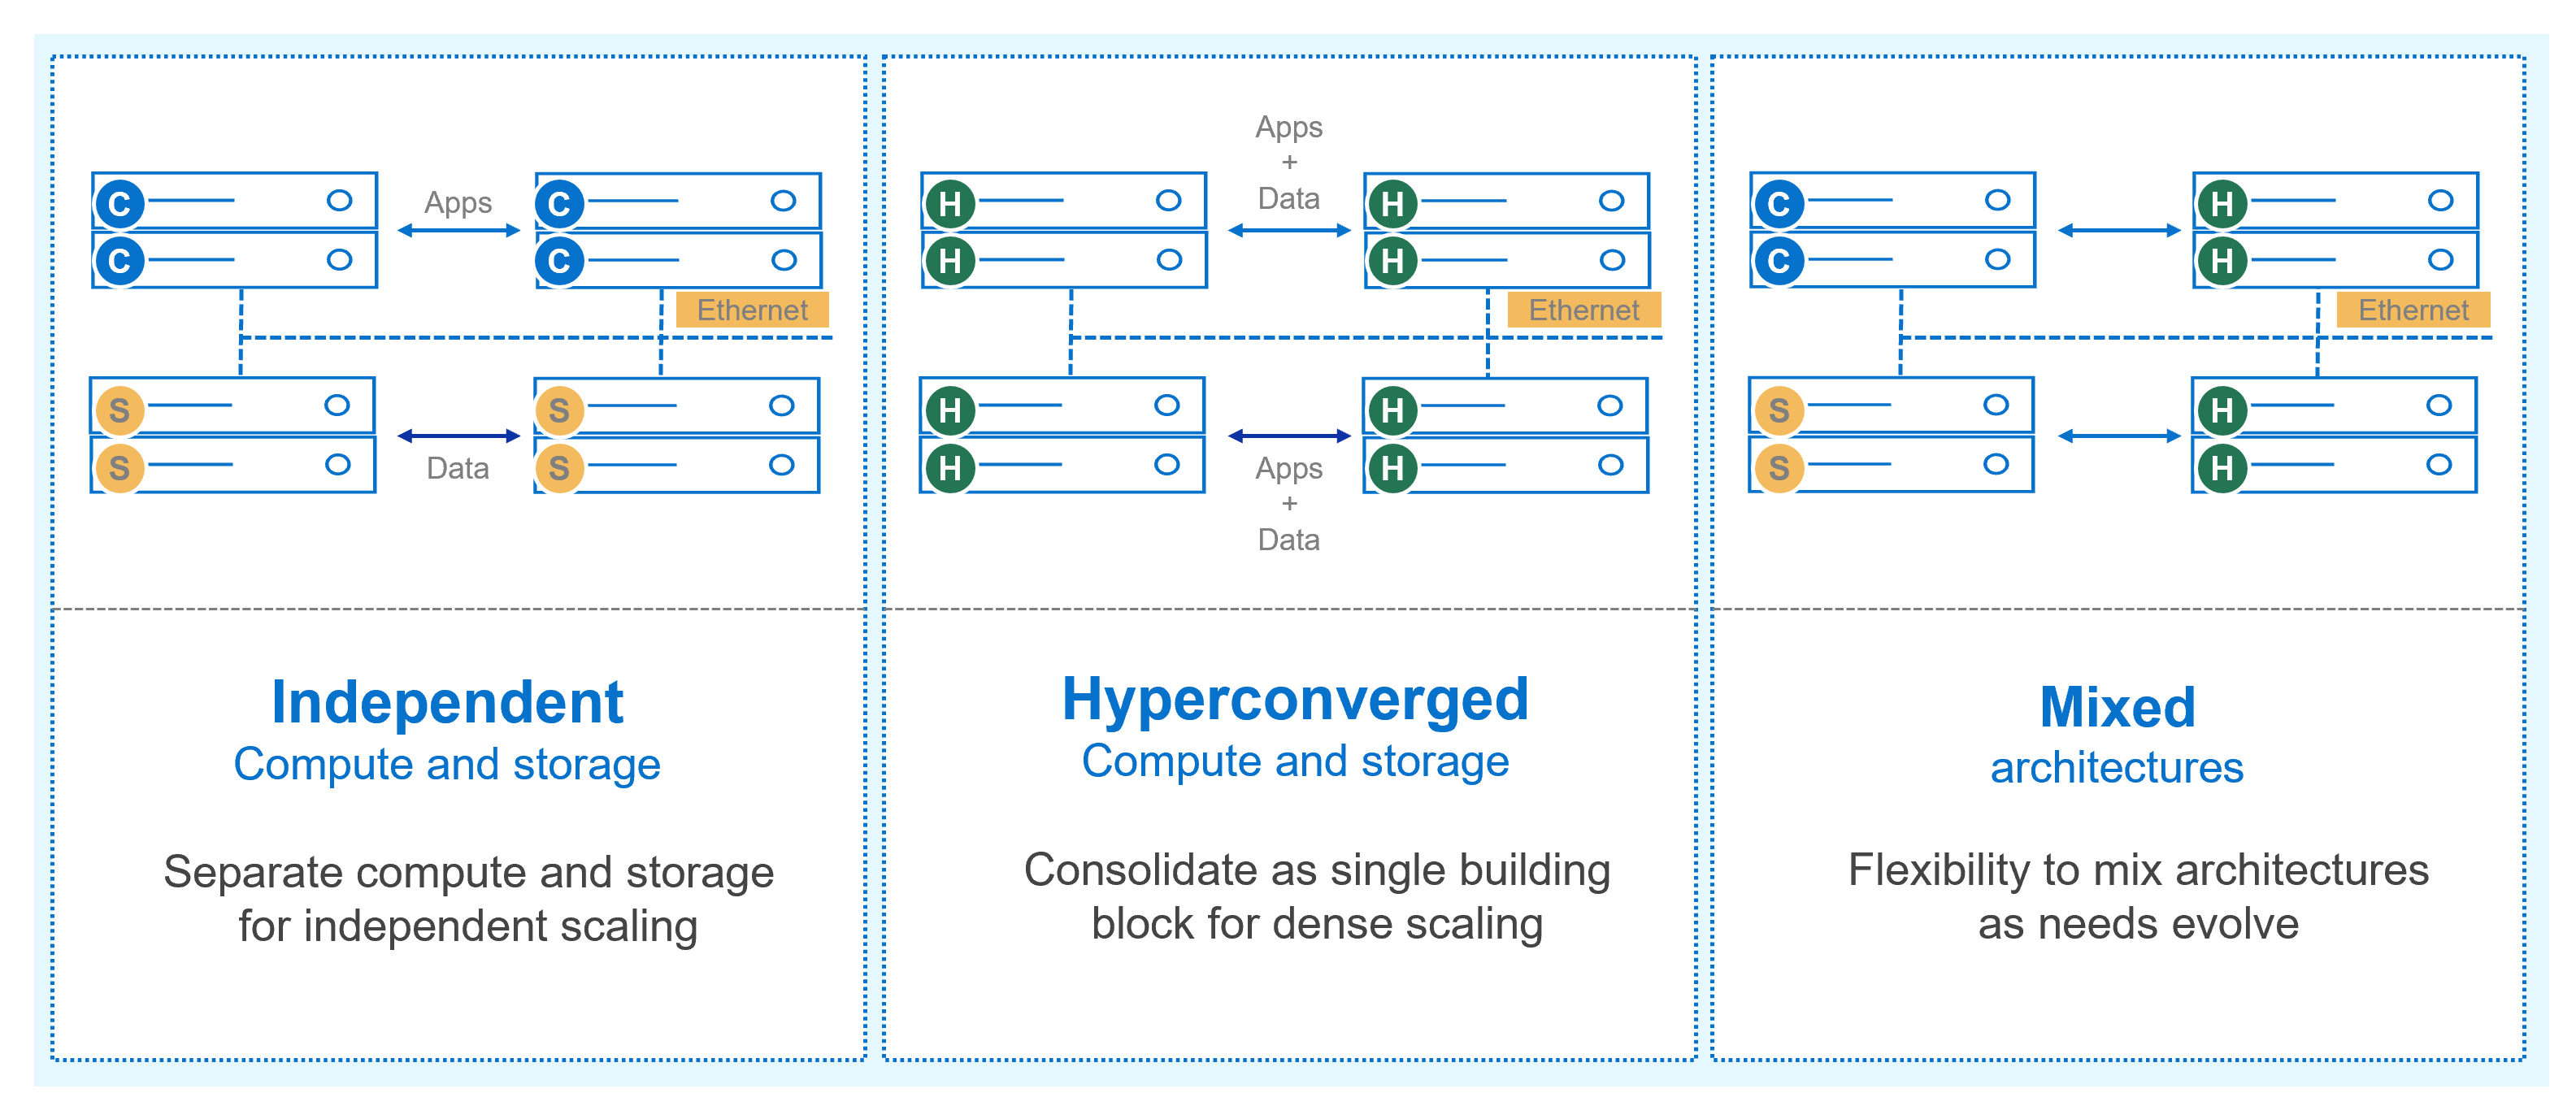 Illustration showing the different PowerFlex deployment options for independent, hyperconverged, and mixed deployment architectures.